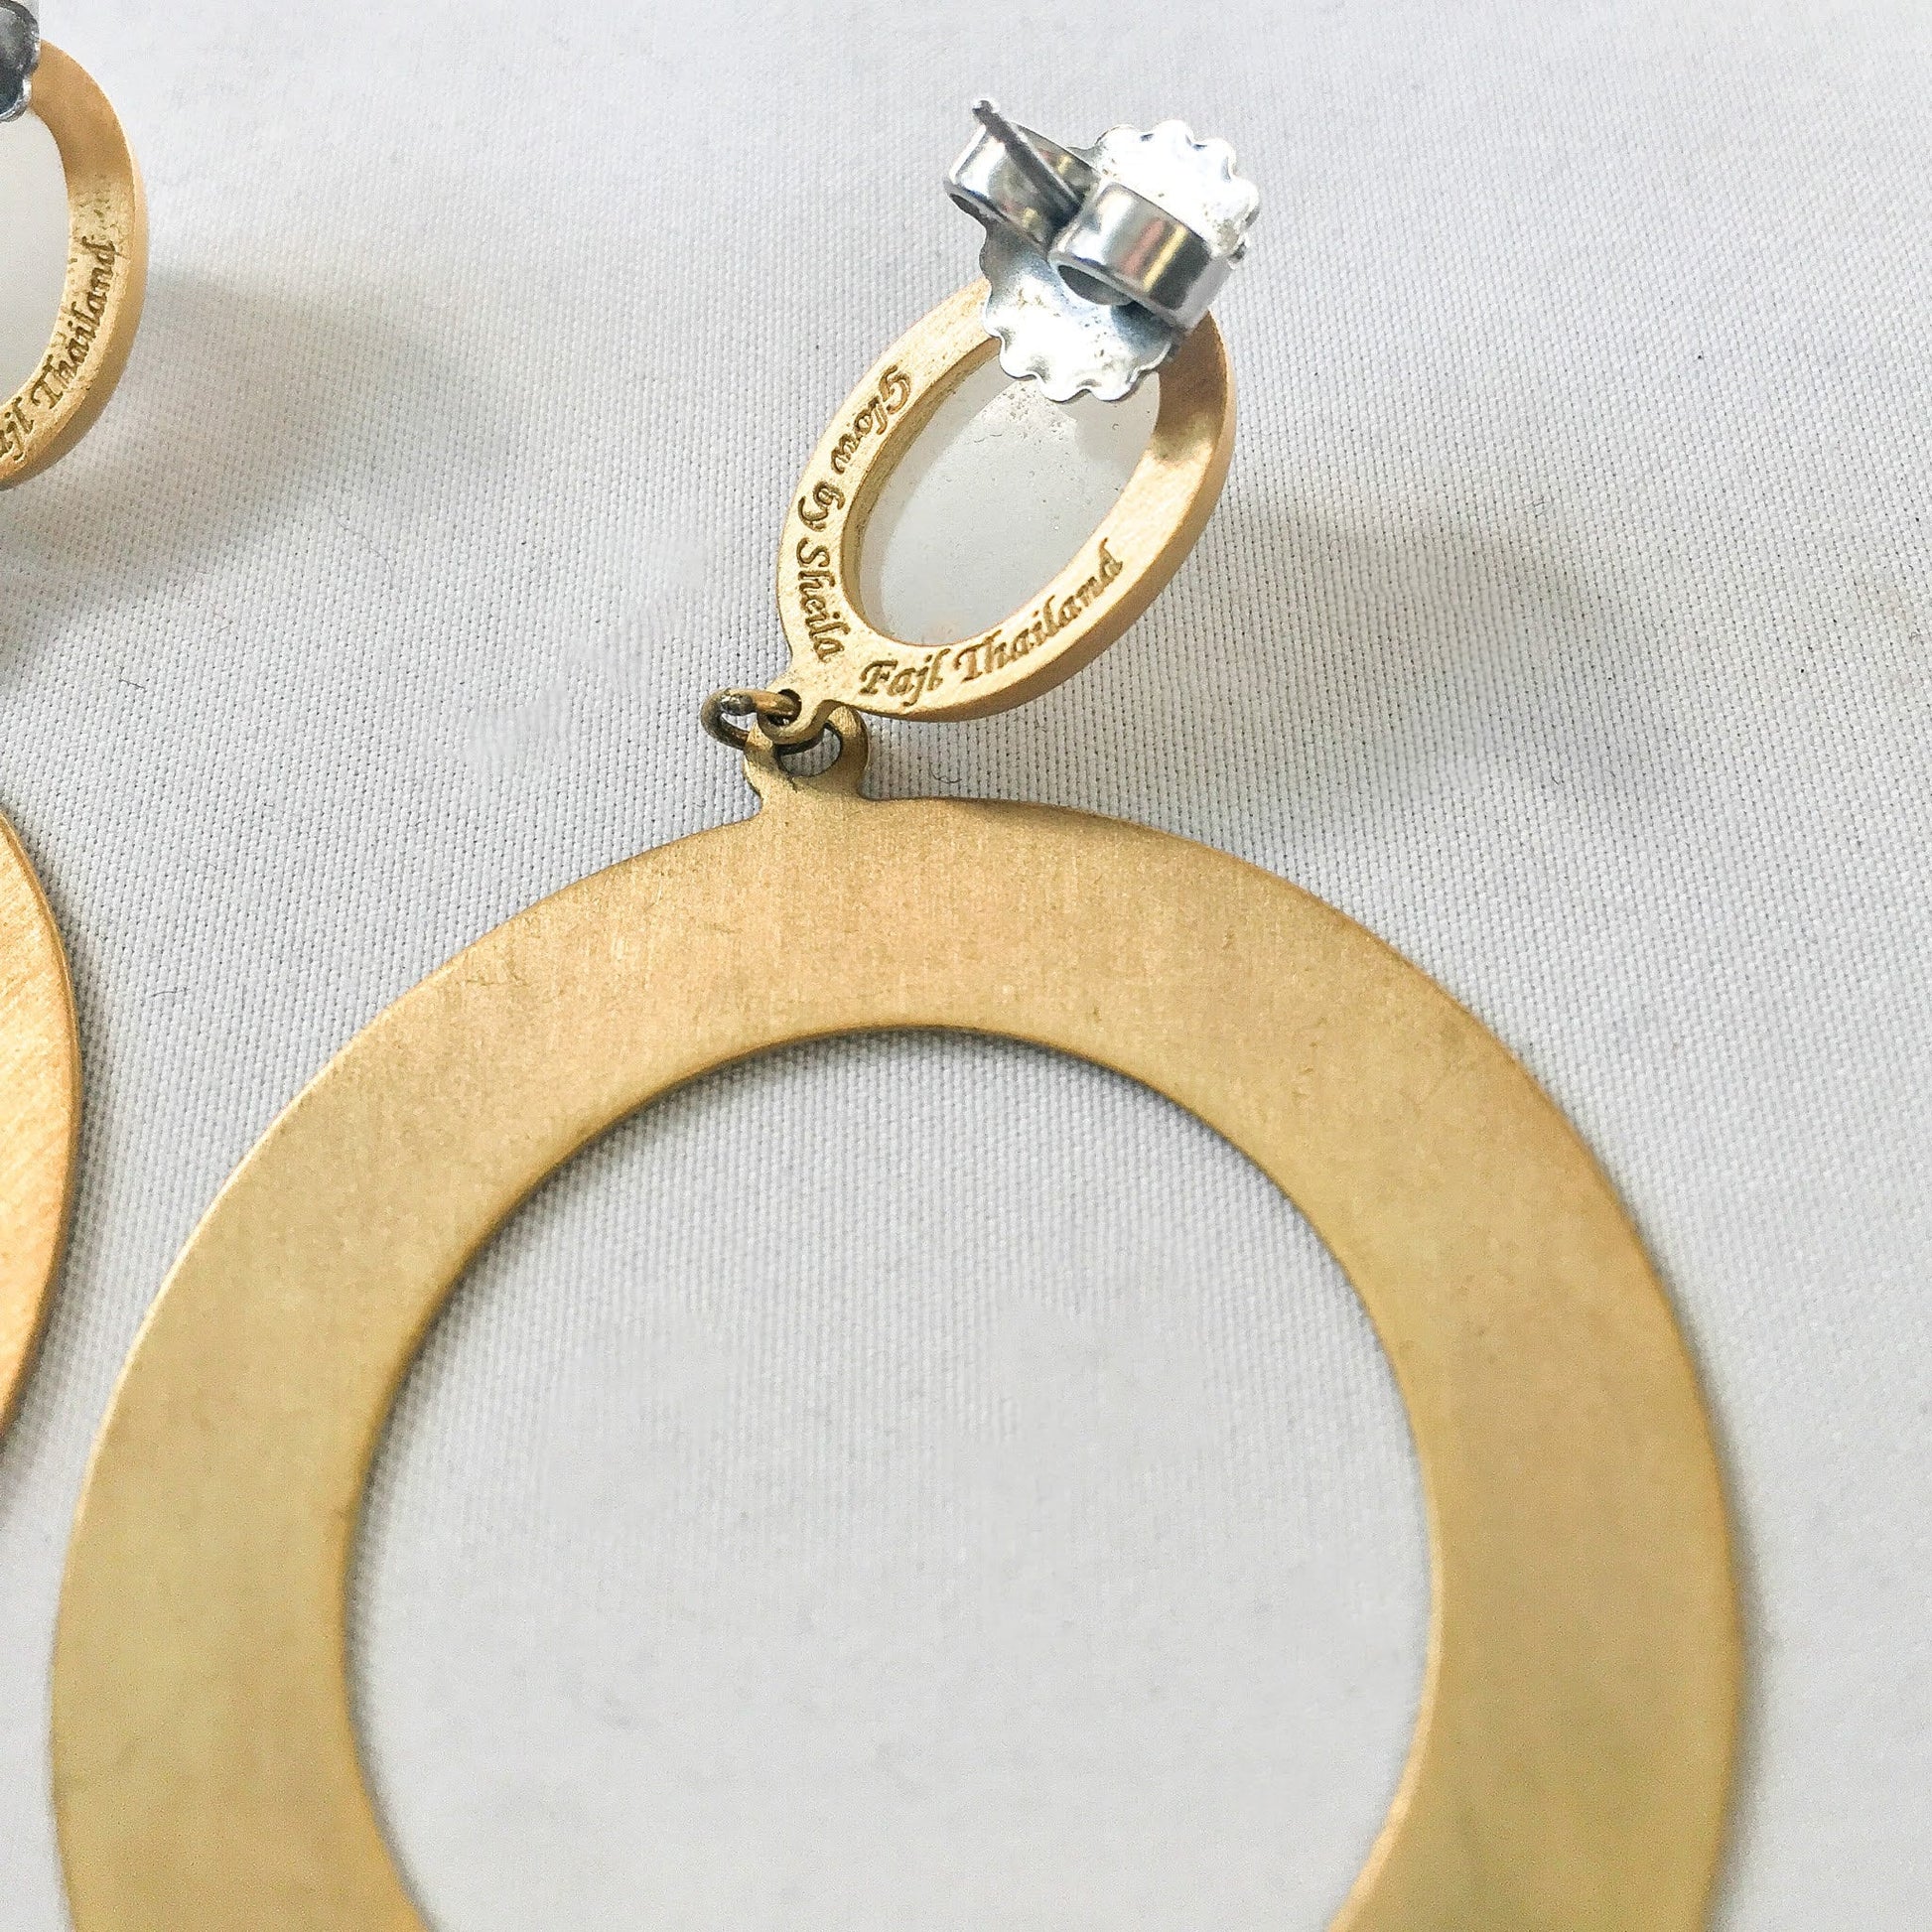 Earrings and Ring Set from Glow by Sheila Fajl, Gold Tone Ring and Gold Tone Dangle Earrings with White Stone